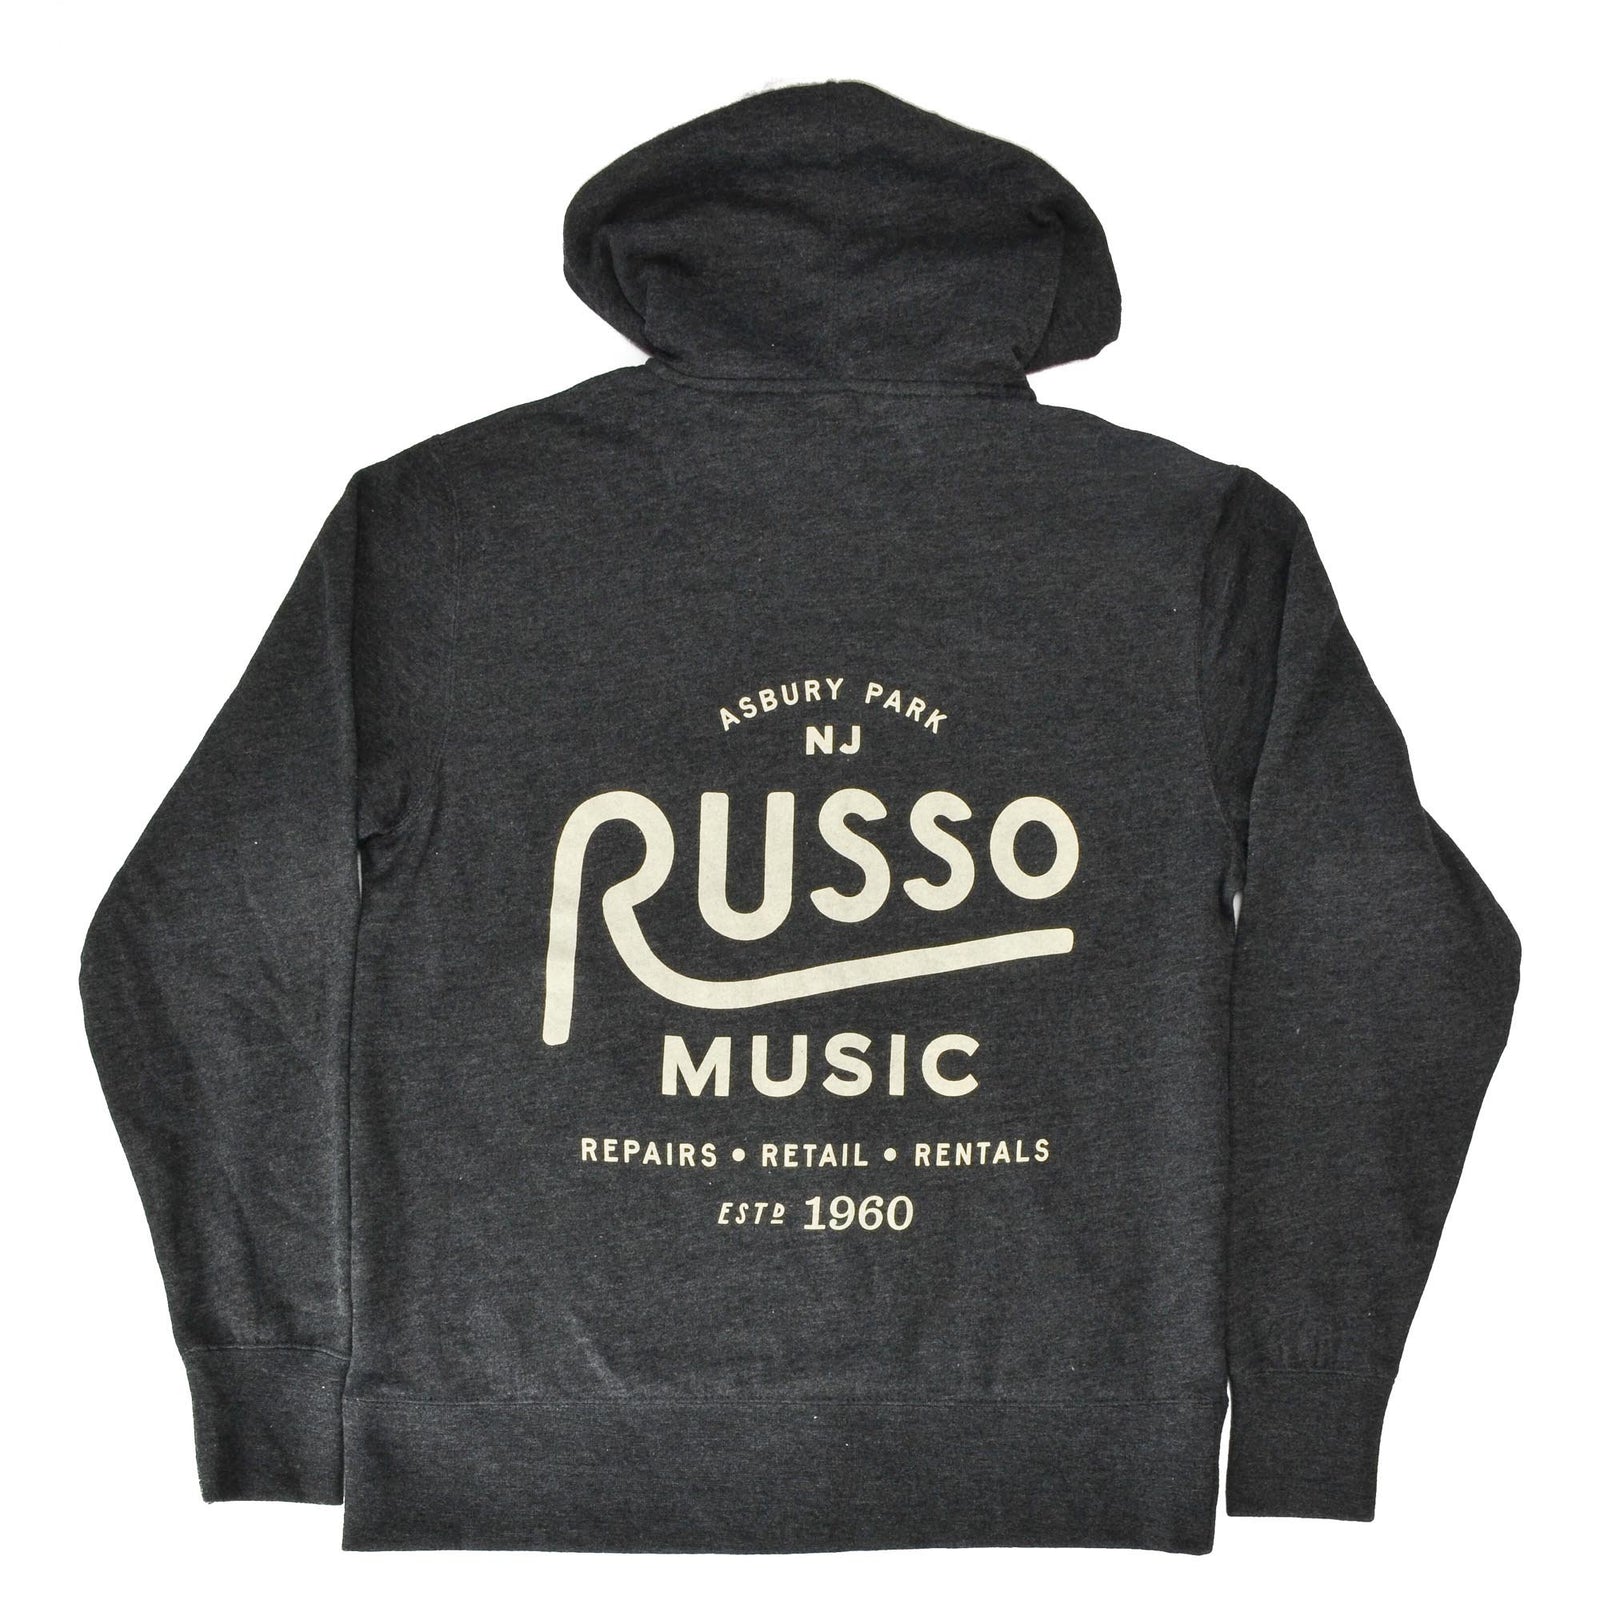 Russo Music Asbury Park 1960 Logo Hoodie - Charcoal Heather